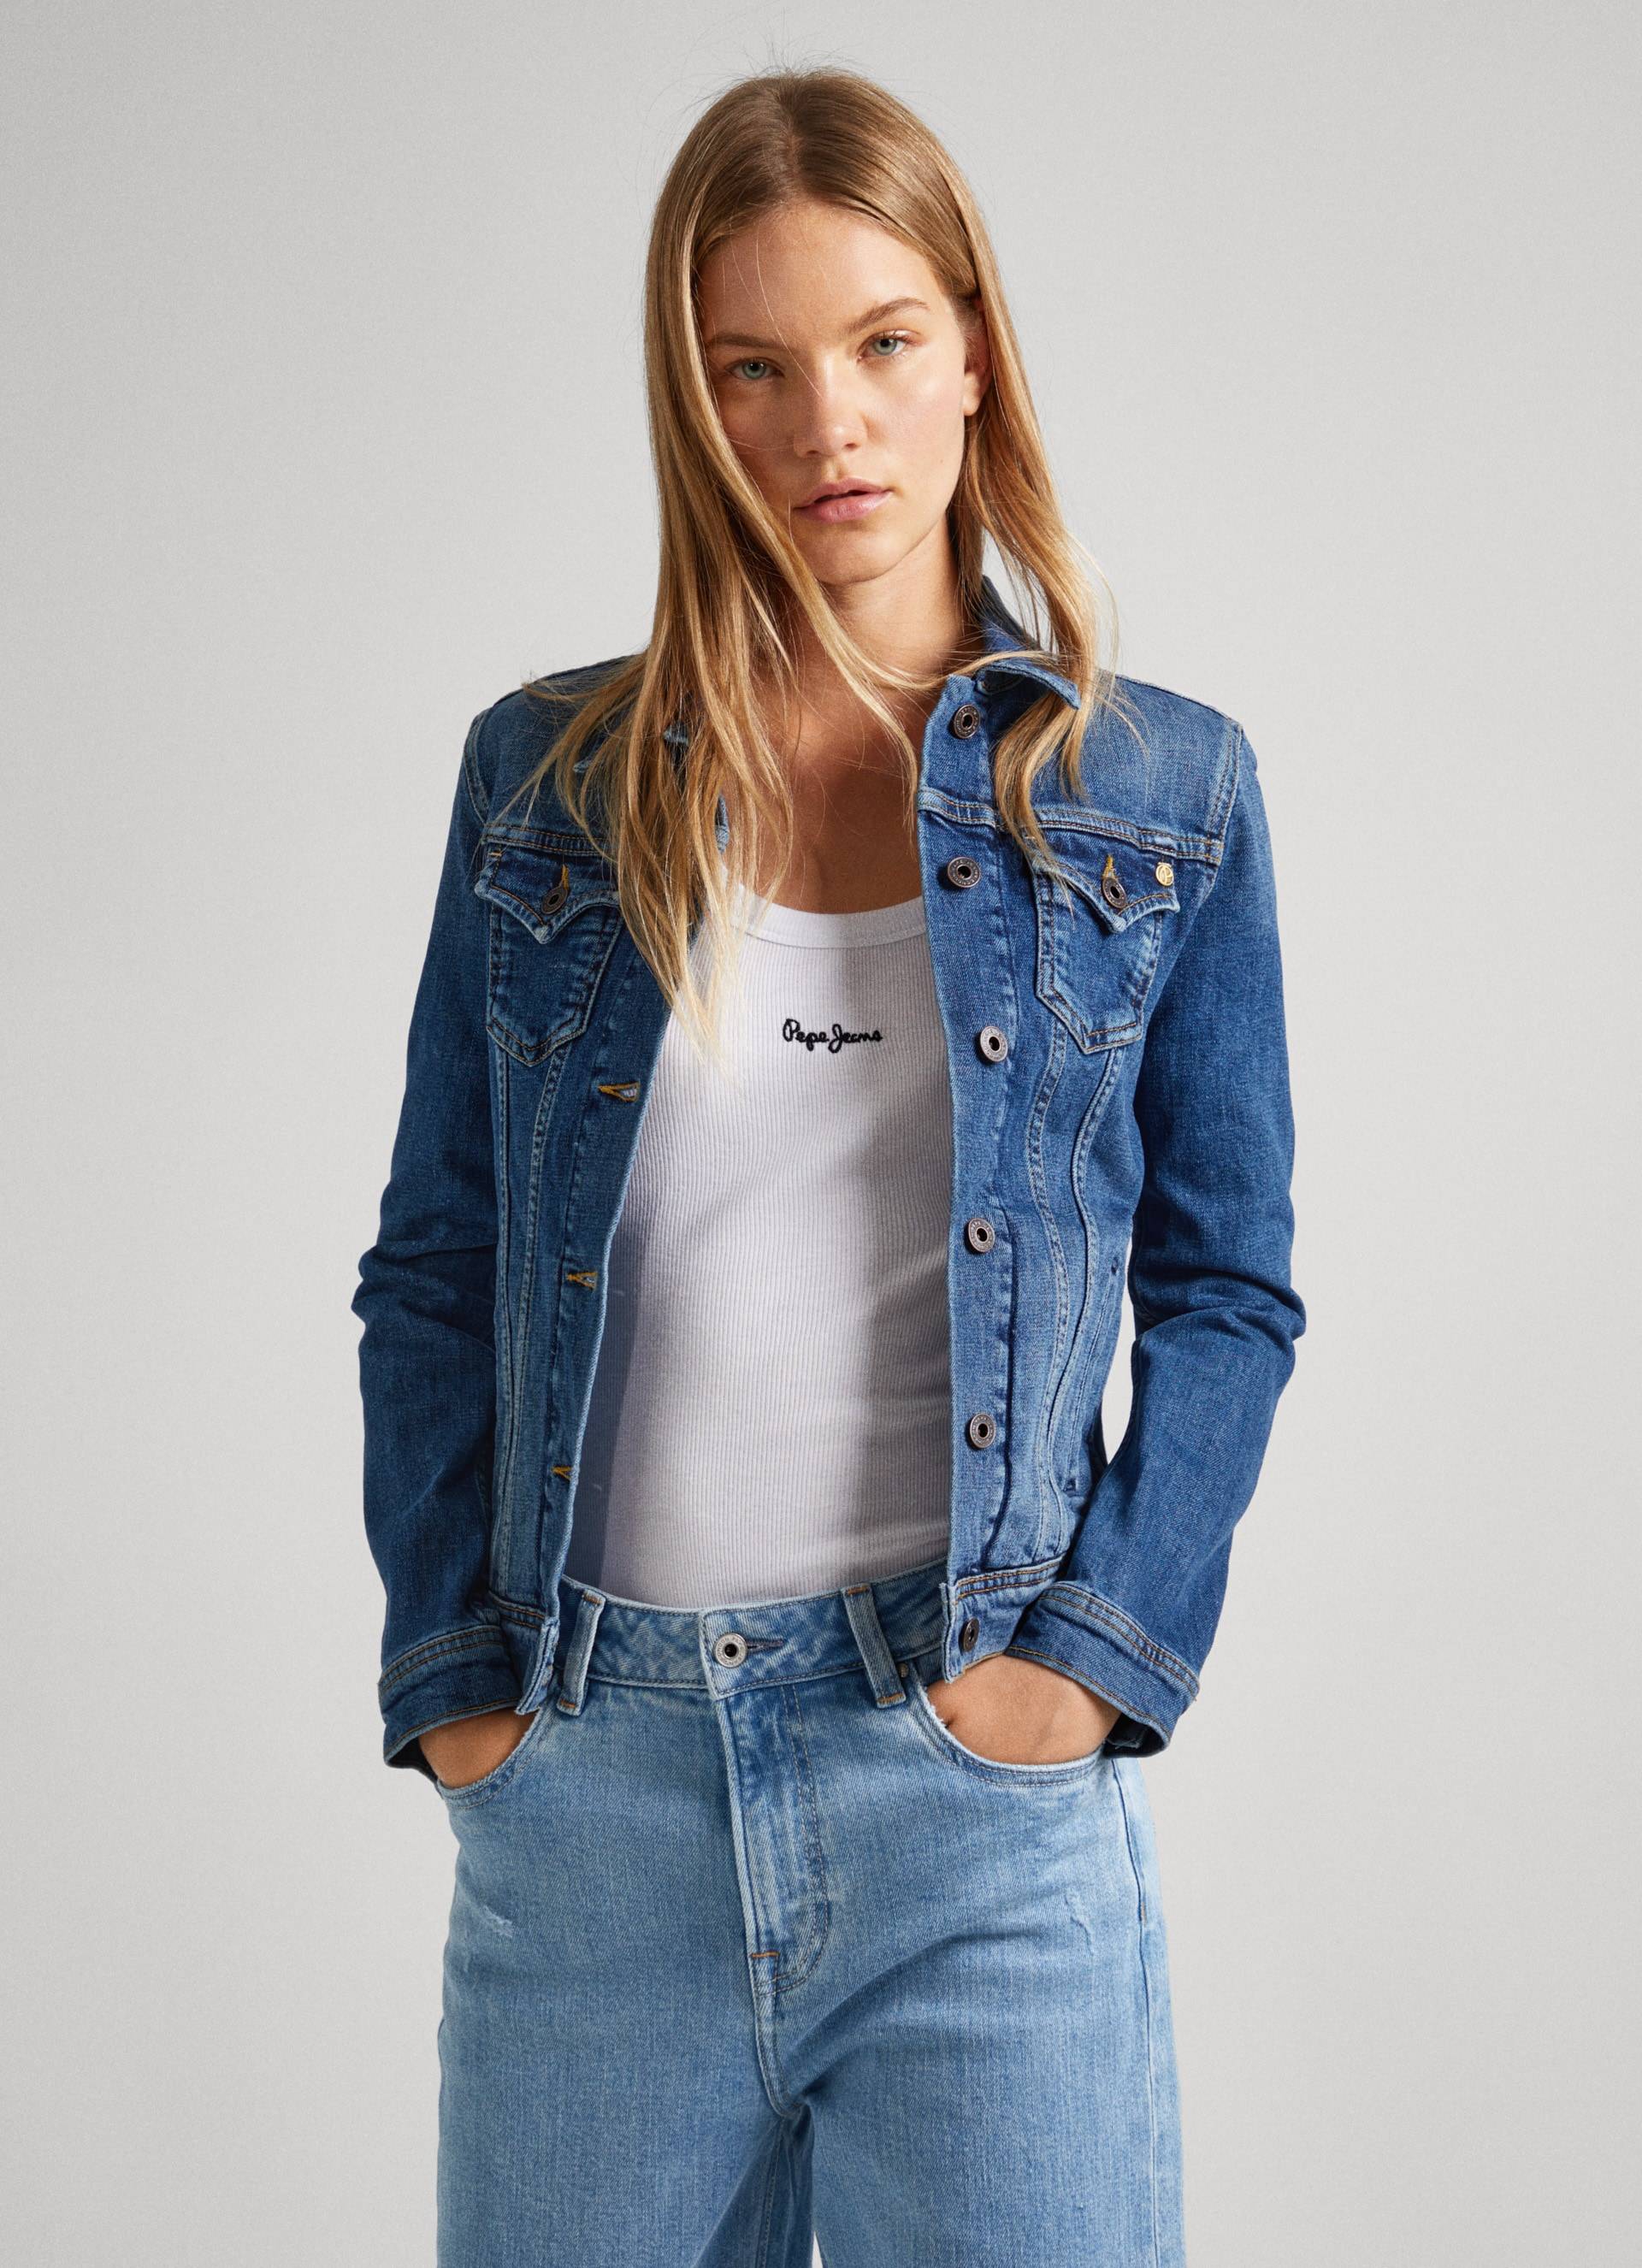 Pepe Jeans Jeansjacke »THRIFT« von Pepe Jeans